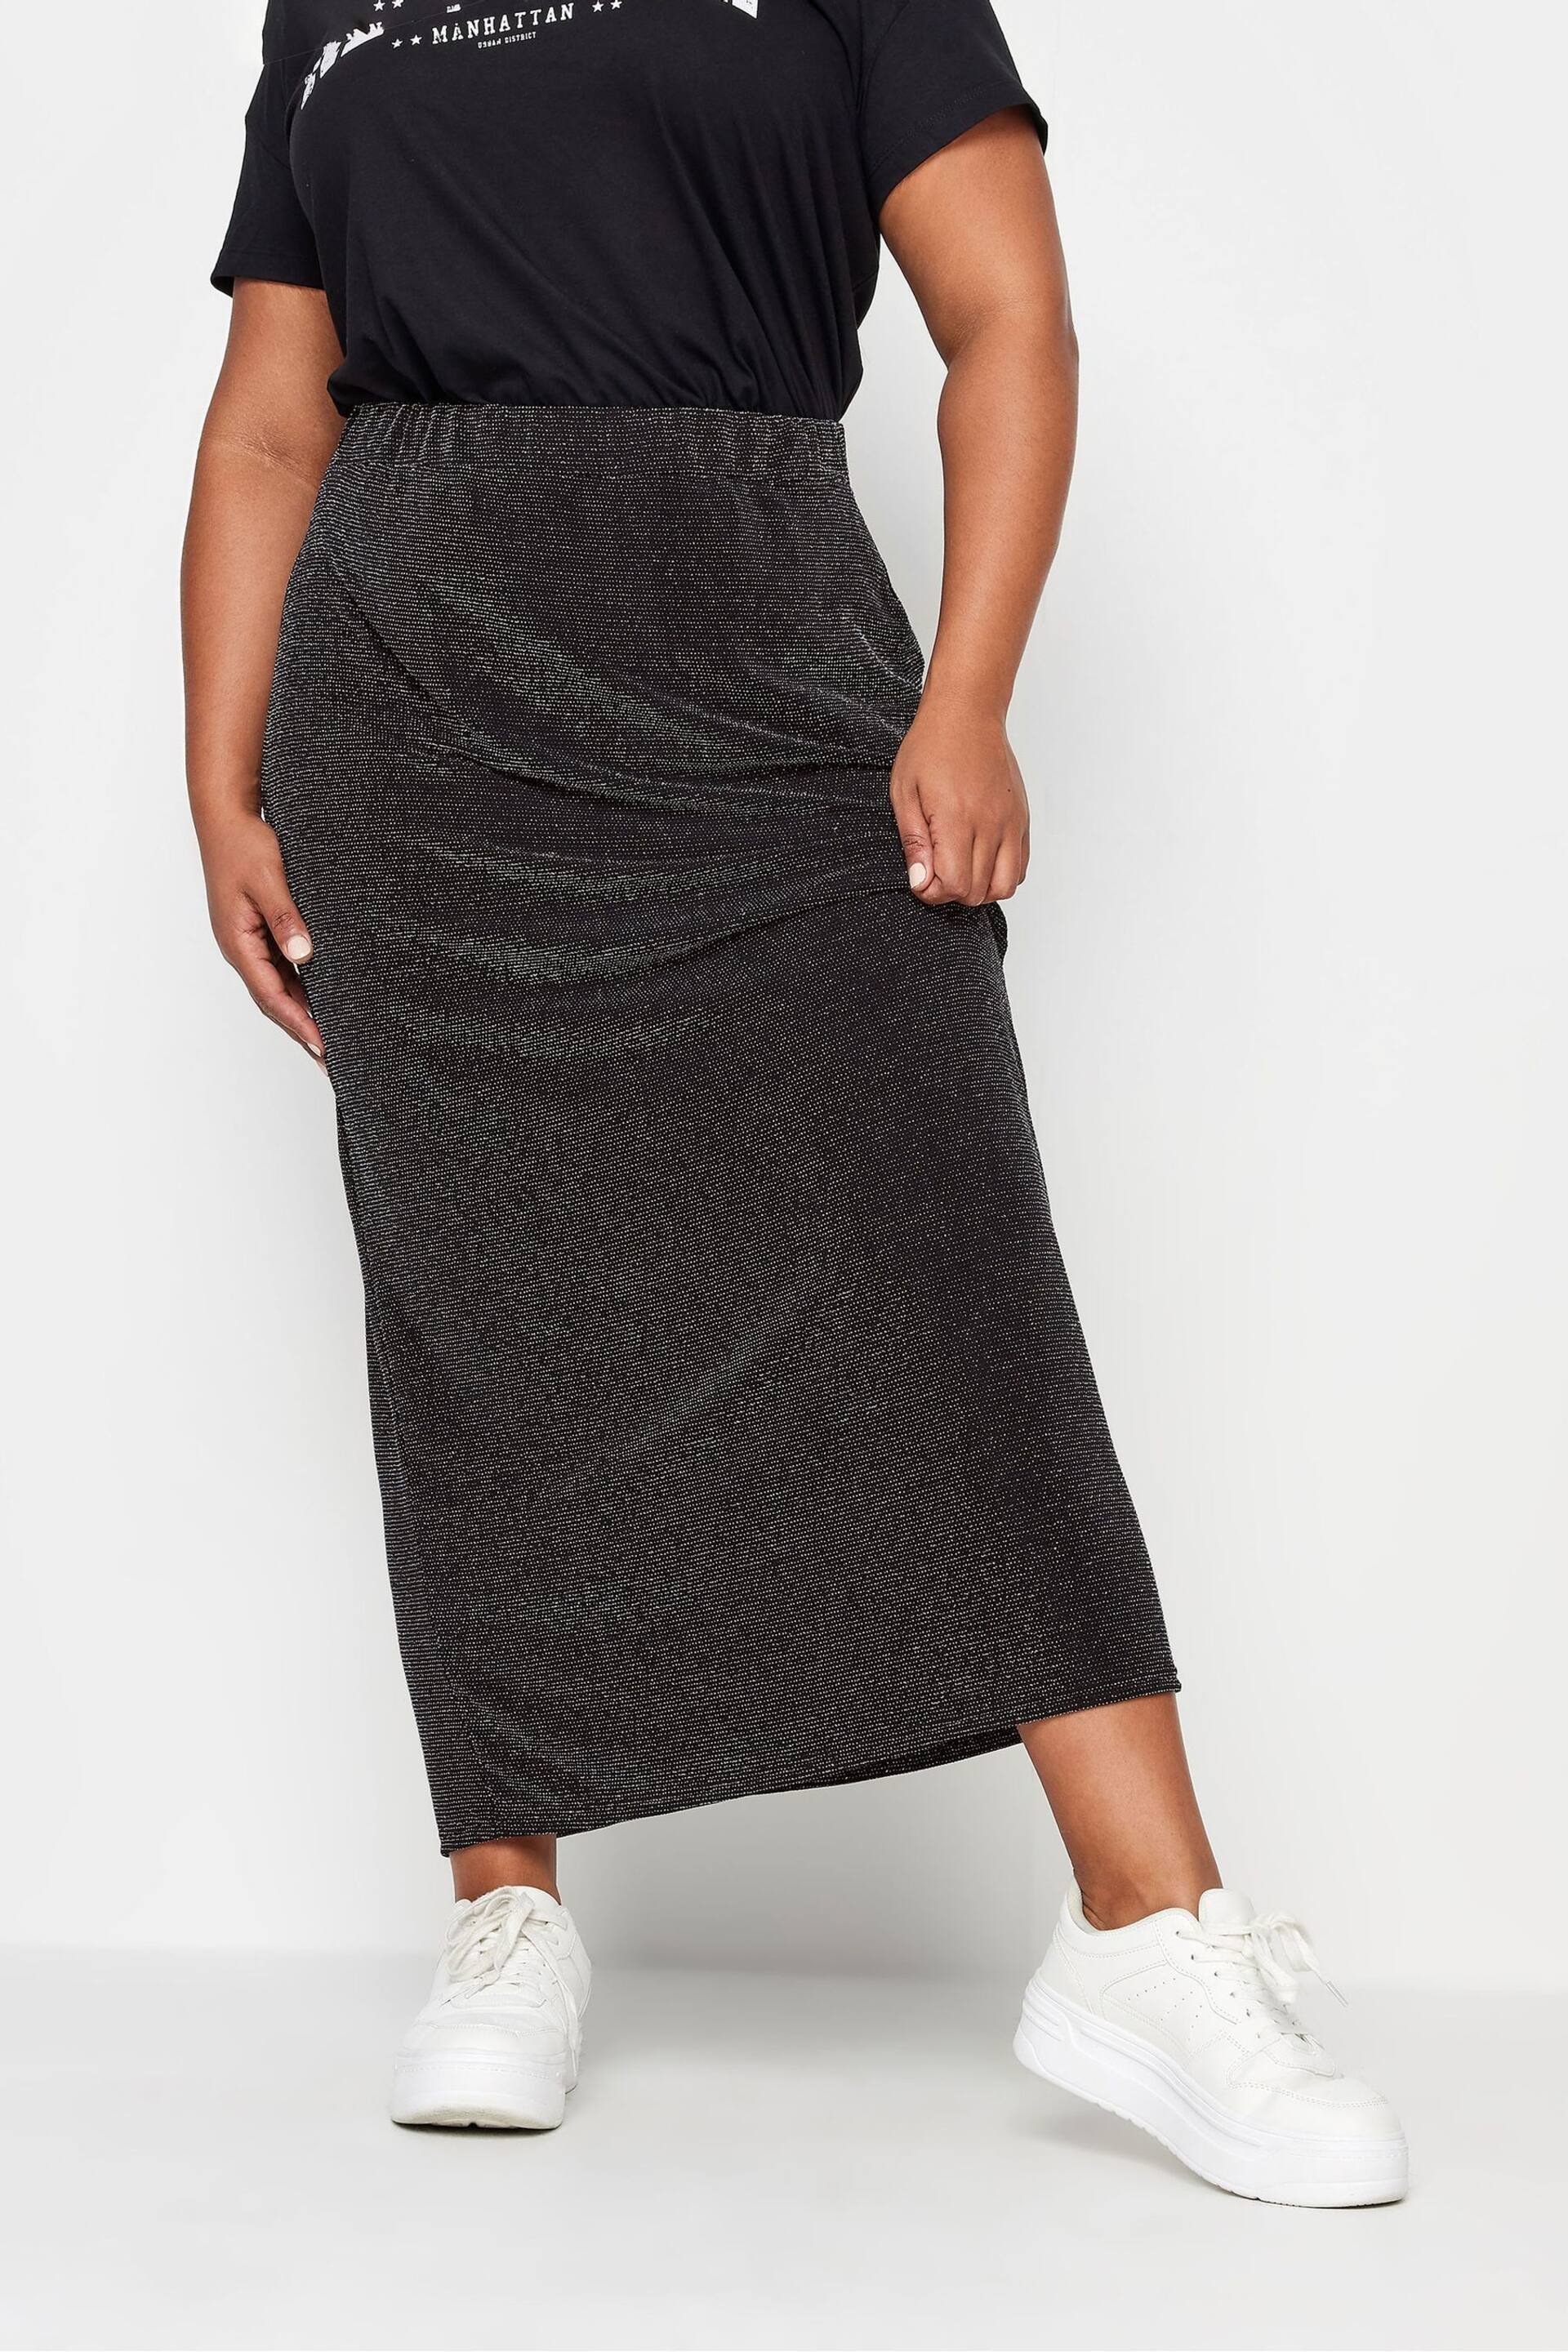 Yours Curve Black Brillo Tube Skirt - Image 5 of 5